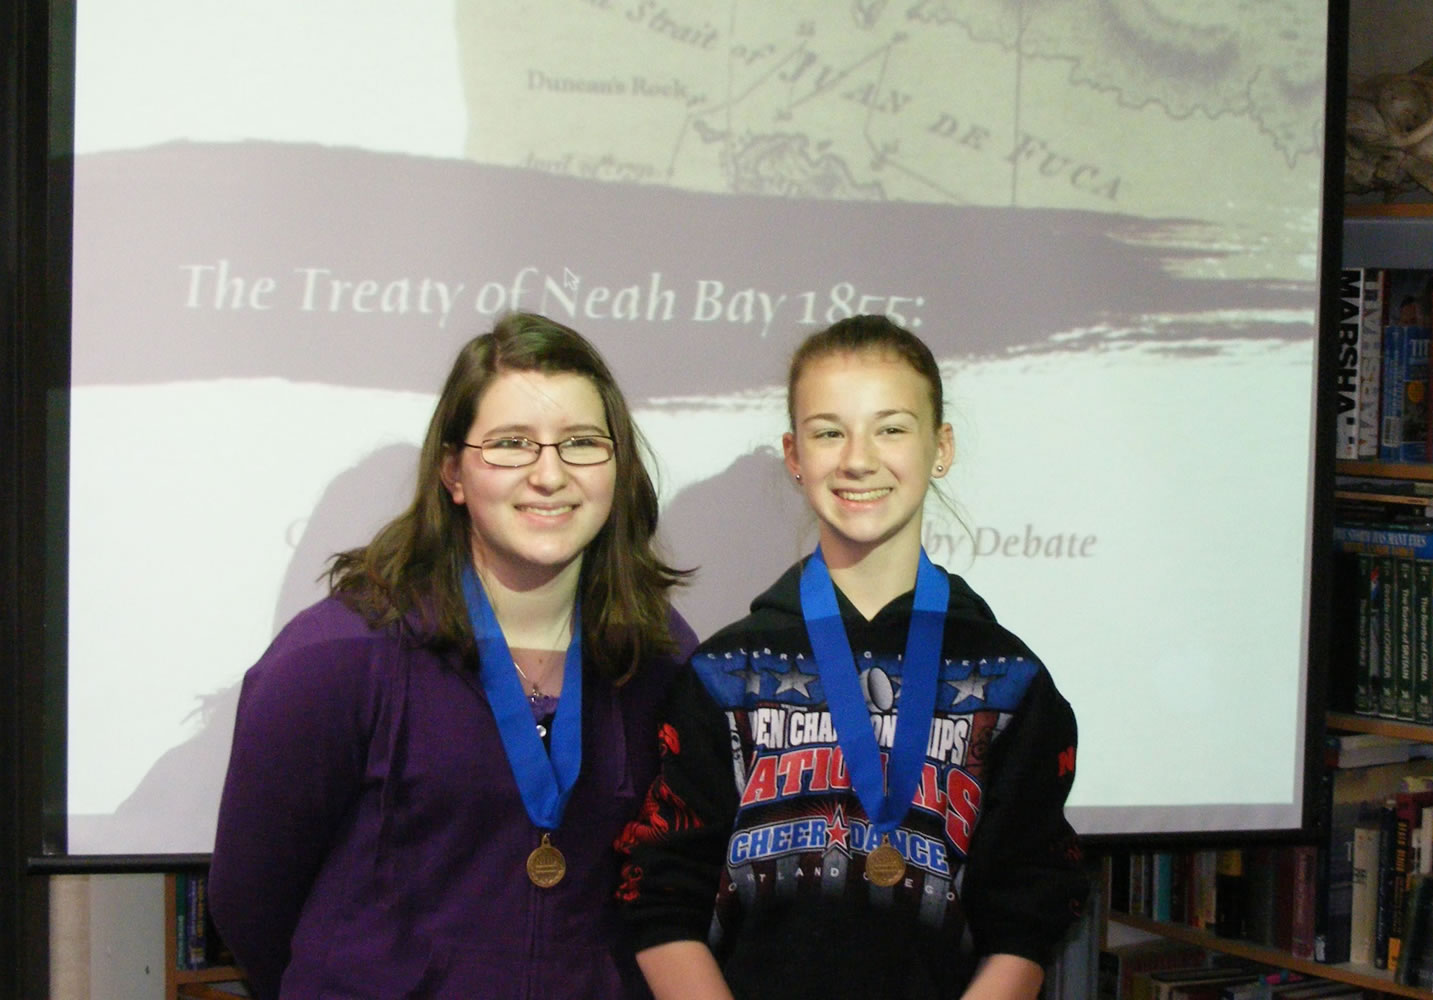 Pleasant Valley Middle School eighth-graders Jessi Shelton, left, and Mercedes McLeod earned fourth place in the documentary category of the National History Day competition in College Park, Md.